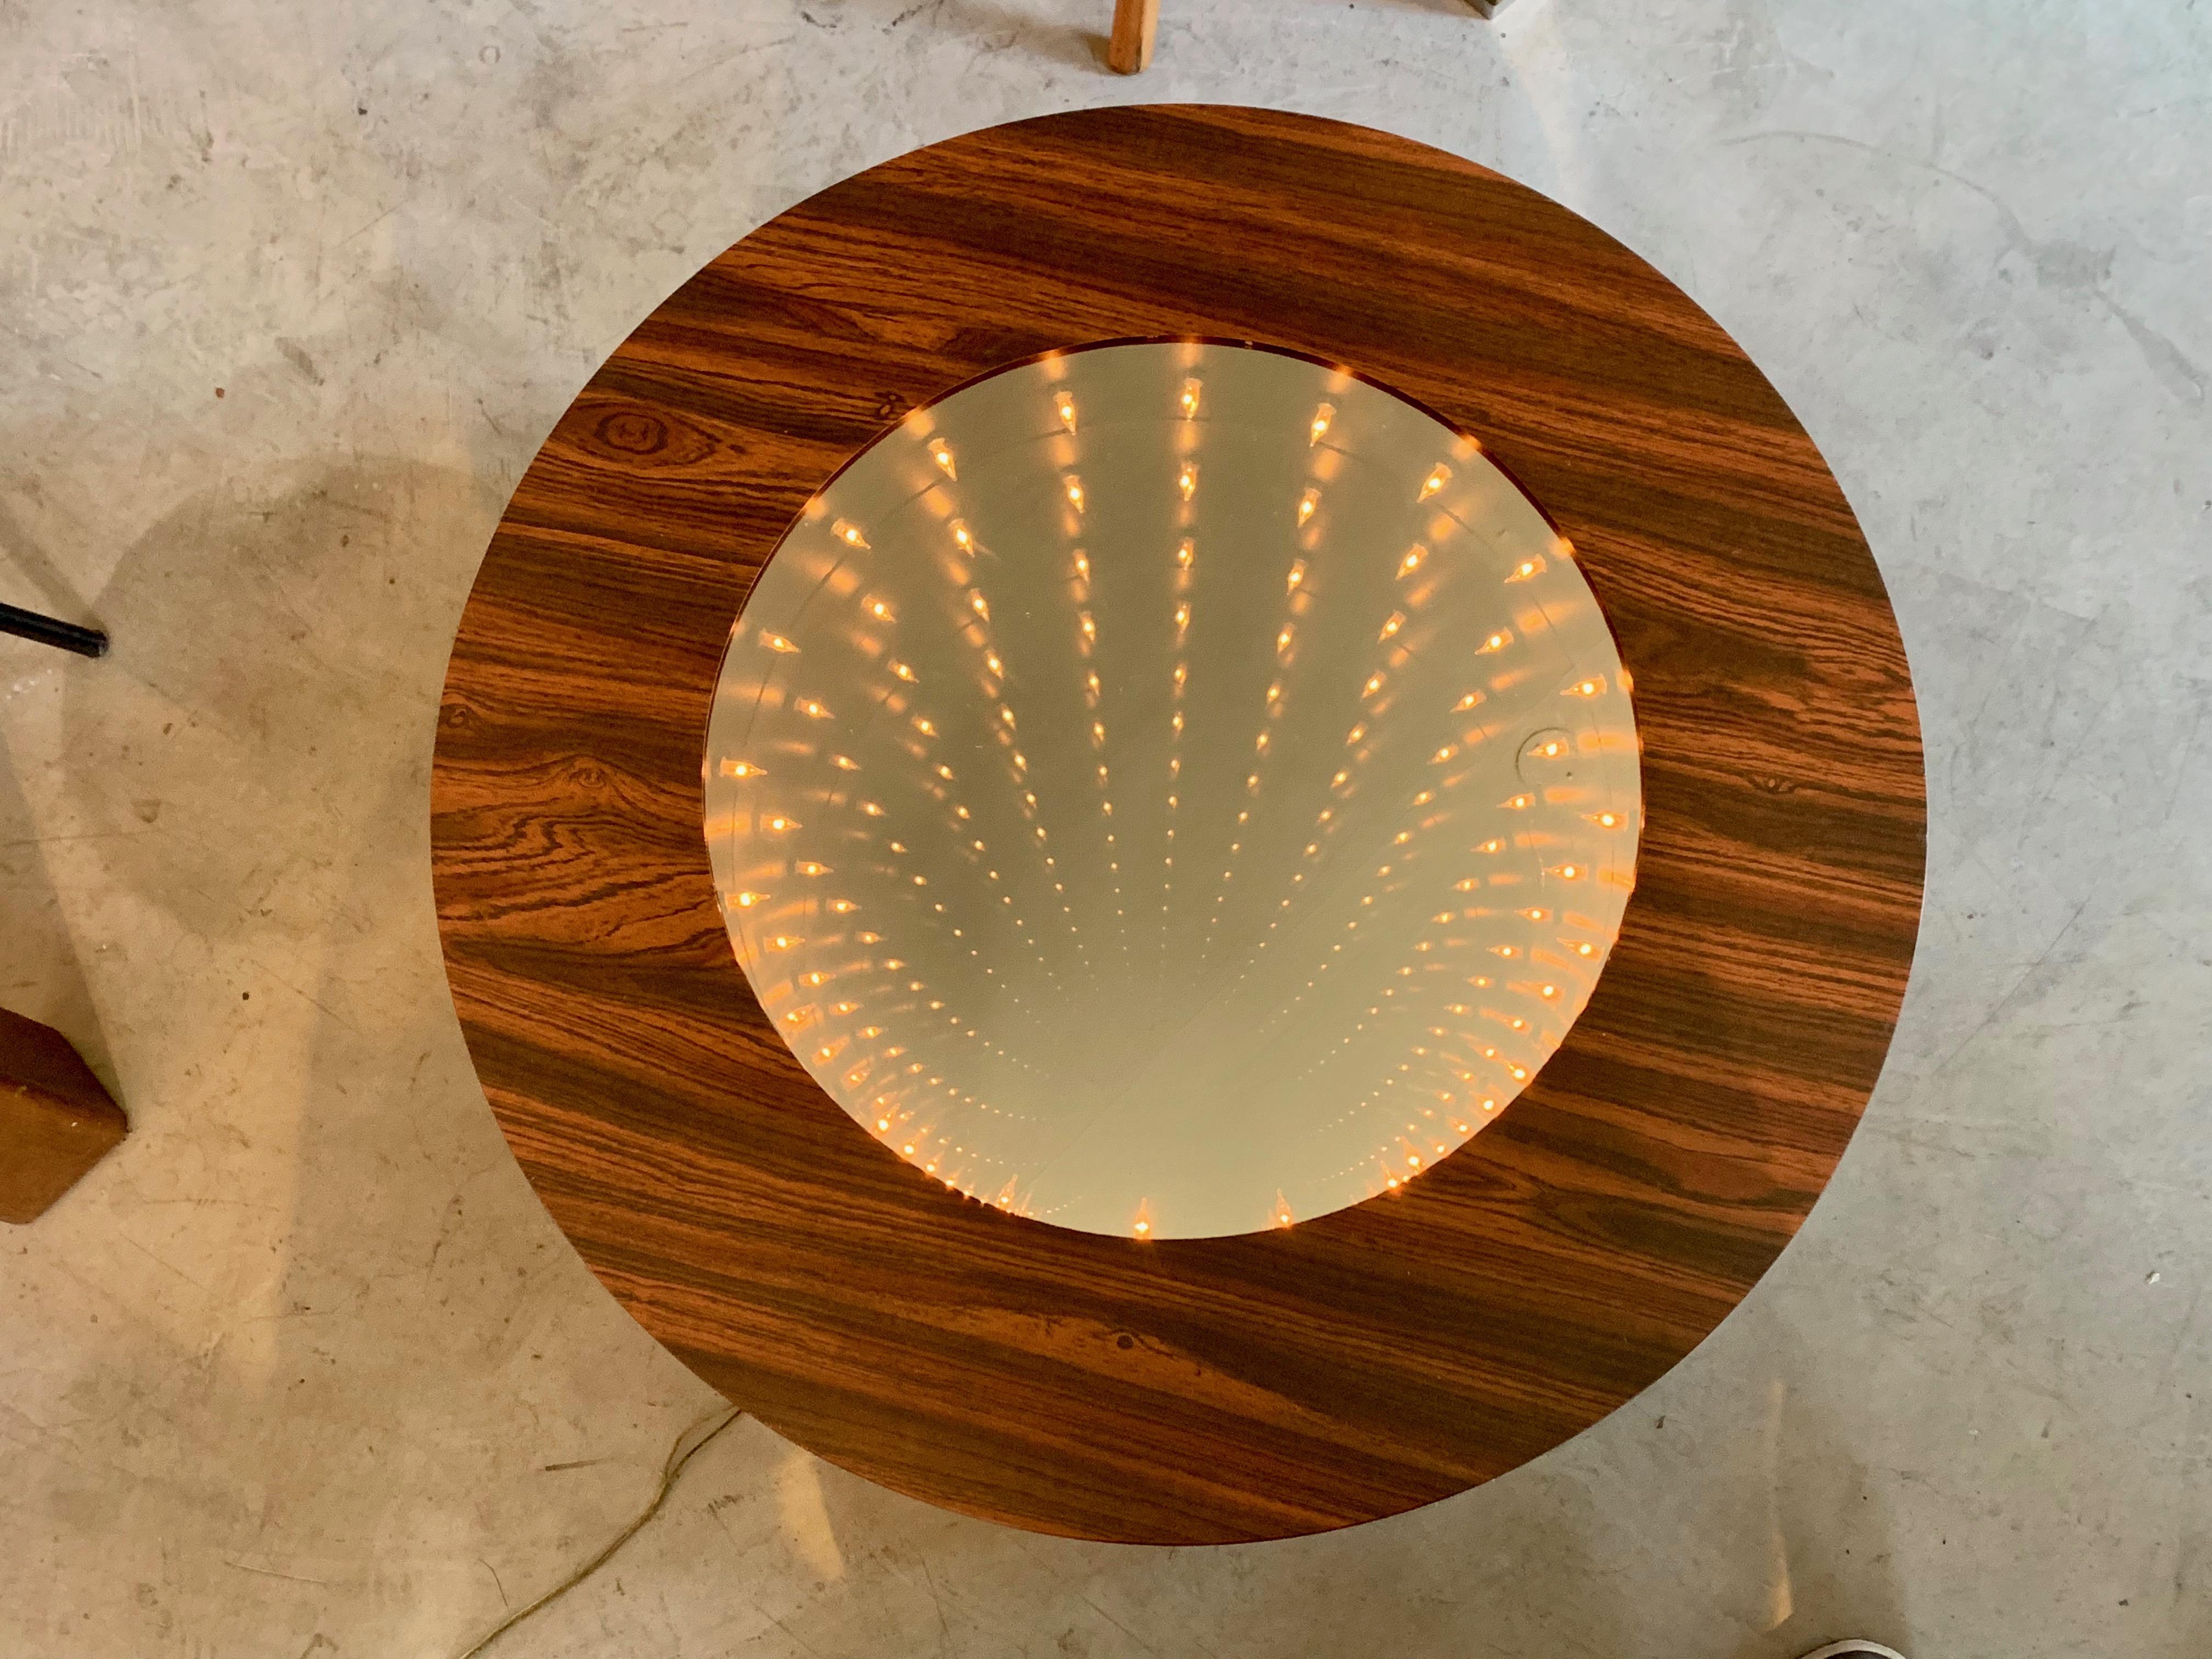 Super cool infinity mirror side table. Functional piece of art! Table is covered in wood veneer. Great condition. Infinity mirror inside is newly rewired. On/off switch on side of table.

  